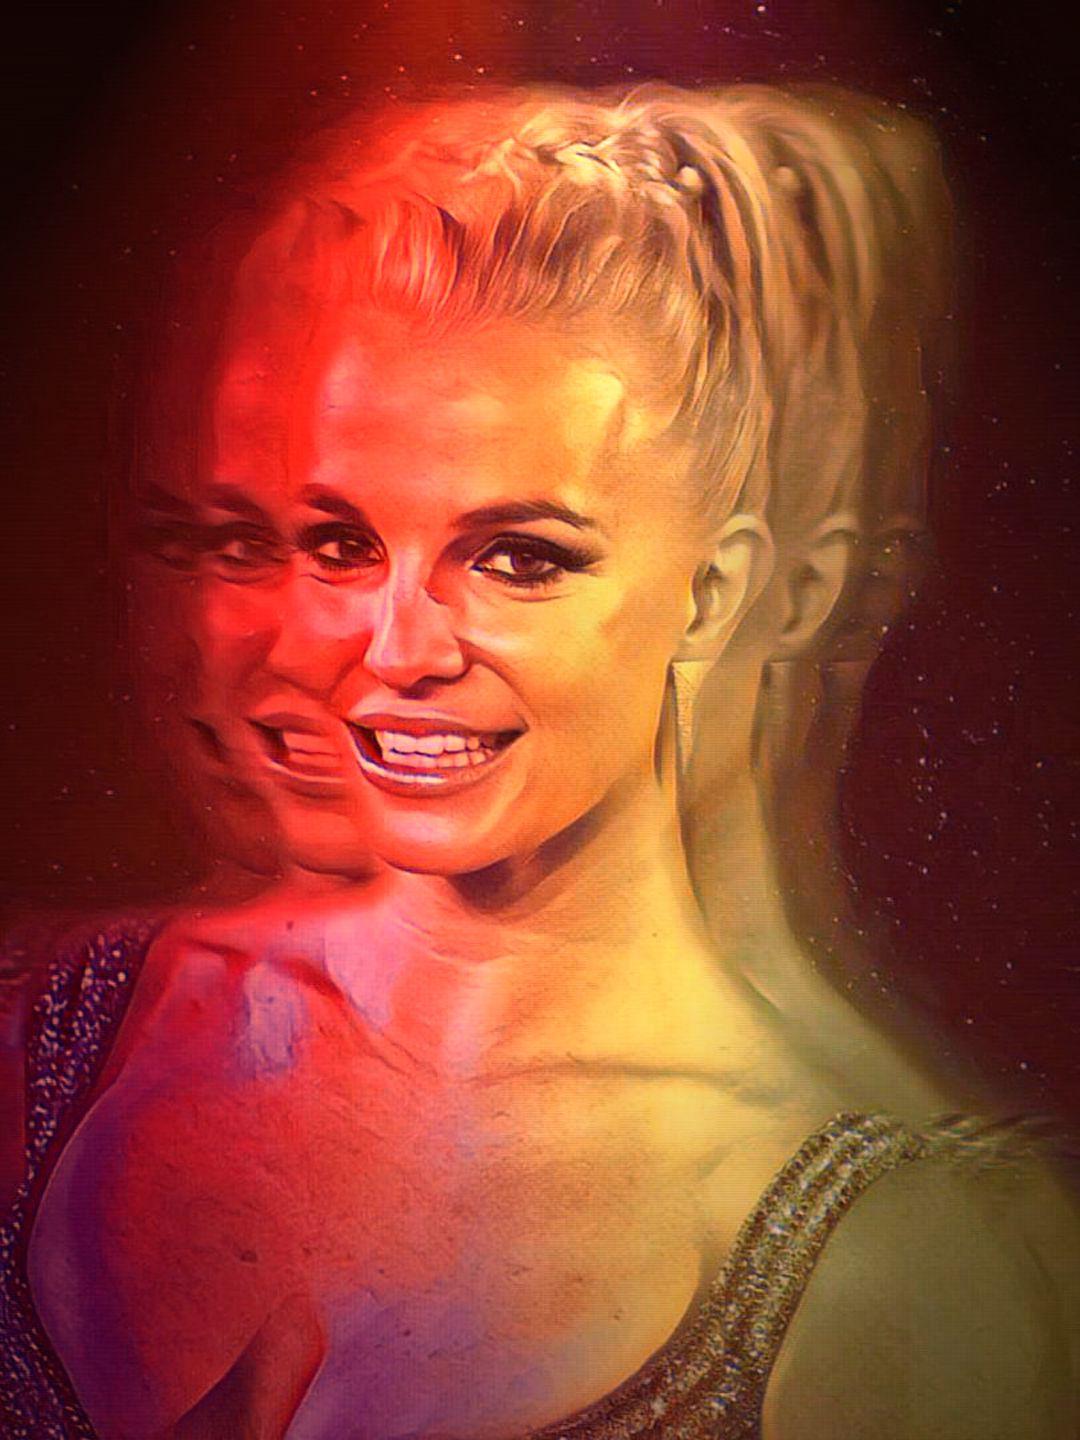 Retro Incest Bpoter Sister - Britney Spears # 3 - Celeb ART - Beautiful Artworks of Celebrities,  Footballers, Politicians and Famous People in World | OpenSea